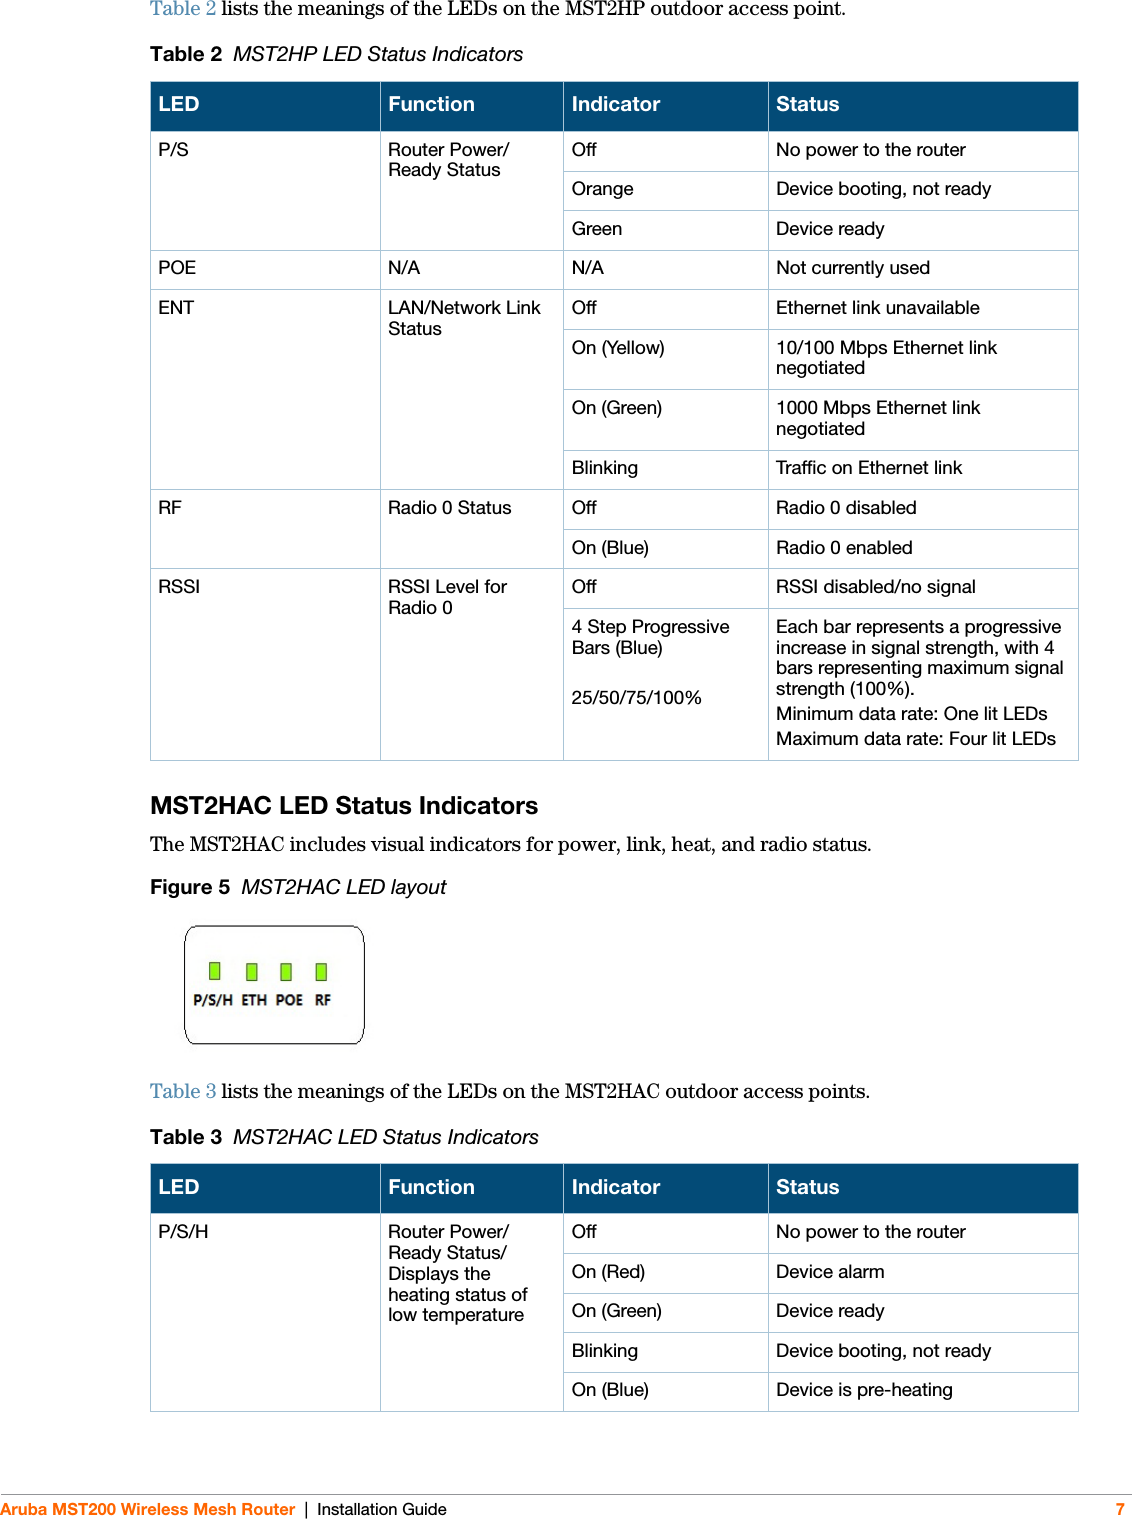 Aruba MST200 Wireless Mesh Router | Installation Guide 7Table 2 lists the meanings of the LEDs on the MST2HP outdoor access point.MST2HAC LED Status IndicatorsThe MST2HAC includes visual indicators for power, link, heat, and radio status.Figure 5  MST2HAC LED layoutTable 3 lists the meanings of the LEDs on the MST2HAC outdoor access points. Table 2  MST2HP LED Status IndicatorsLED Function Indicator StatusP/S Router Power/Ready StatusOff No power to the routerOrange Device booting, not readyGreen Device readyPOE N/A N/A Not currently usedENT LAN/Network Link Status Off Ethernet link unavailableOn (Yellow) 10/100 Mbps Ethernet link negotiatedOn (Green) 1000 Mbps Ethernet link negotiatedBlinking Traffic on Ethernet linkRF Radio 0 Status Off Radio 0 disabledOn (Blue) Radio 0 enabledRSSI  RSSI Level for Radio 0Off RSSI disabled/no signal4 Step Progressive Bars (Blue)25/50/75/100% Each bar represents a progressive increase in signal strength, with 4 bars representing maximum signal strength (100%).Minimum data rate: One lit LEDsMaximum data rate: Four lit LEDsTable 3  MST2HAC LED Status IndicatorsLED Function Indicator StatusP/S/H Router Power/Ready Status/Displays the heating status of low temperatureOff No power to the routerOn (Red) Device alarmOn (Green) Device readyBlinking  Device booting, not readyOn (Blue) Device is pre-heating